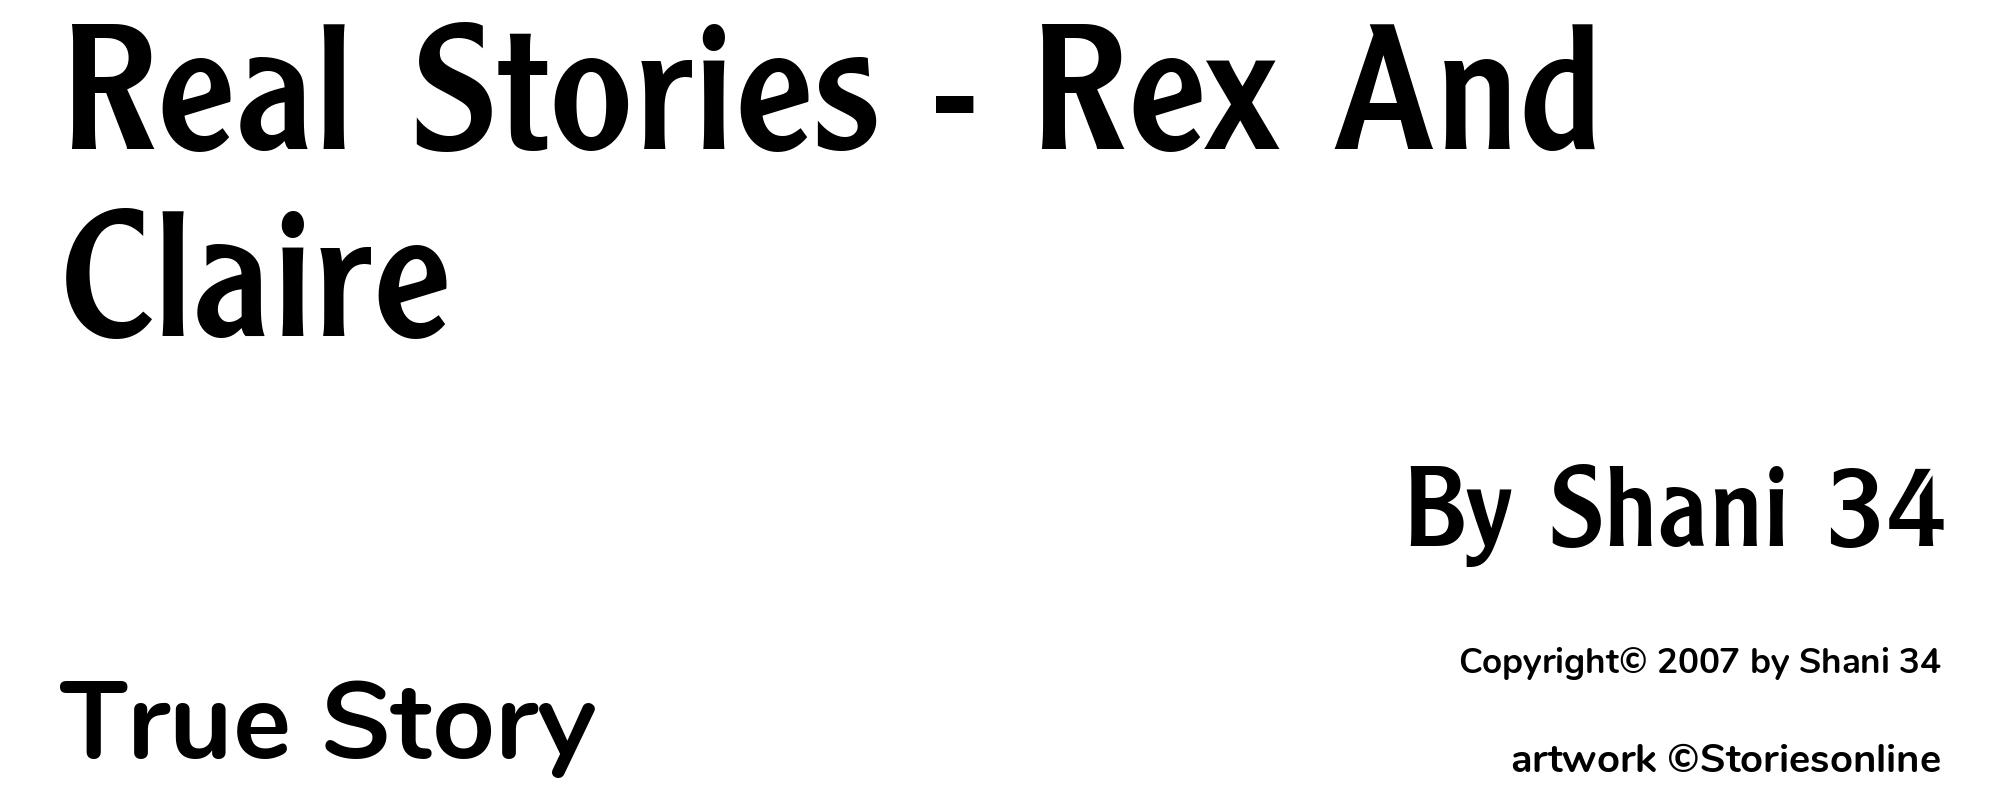 Real Stories - Rex And Claire - Cover